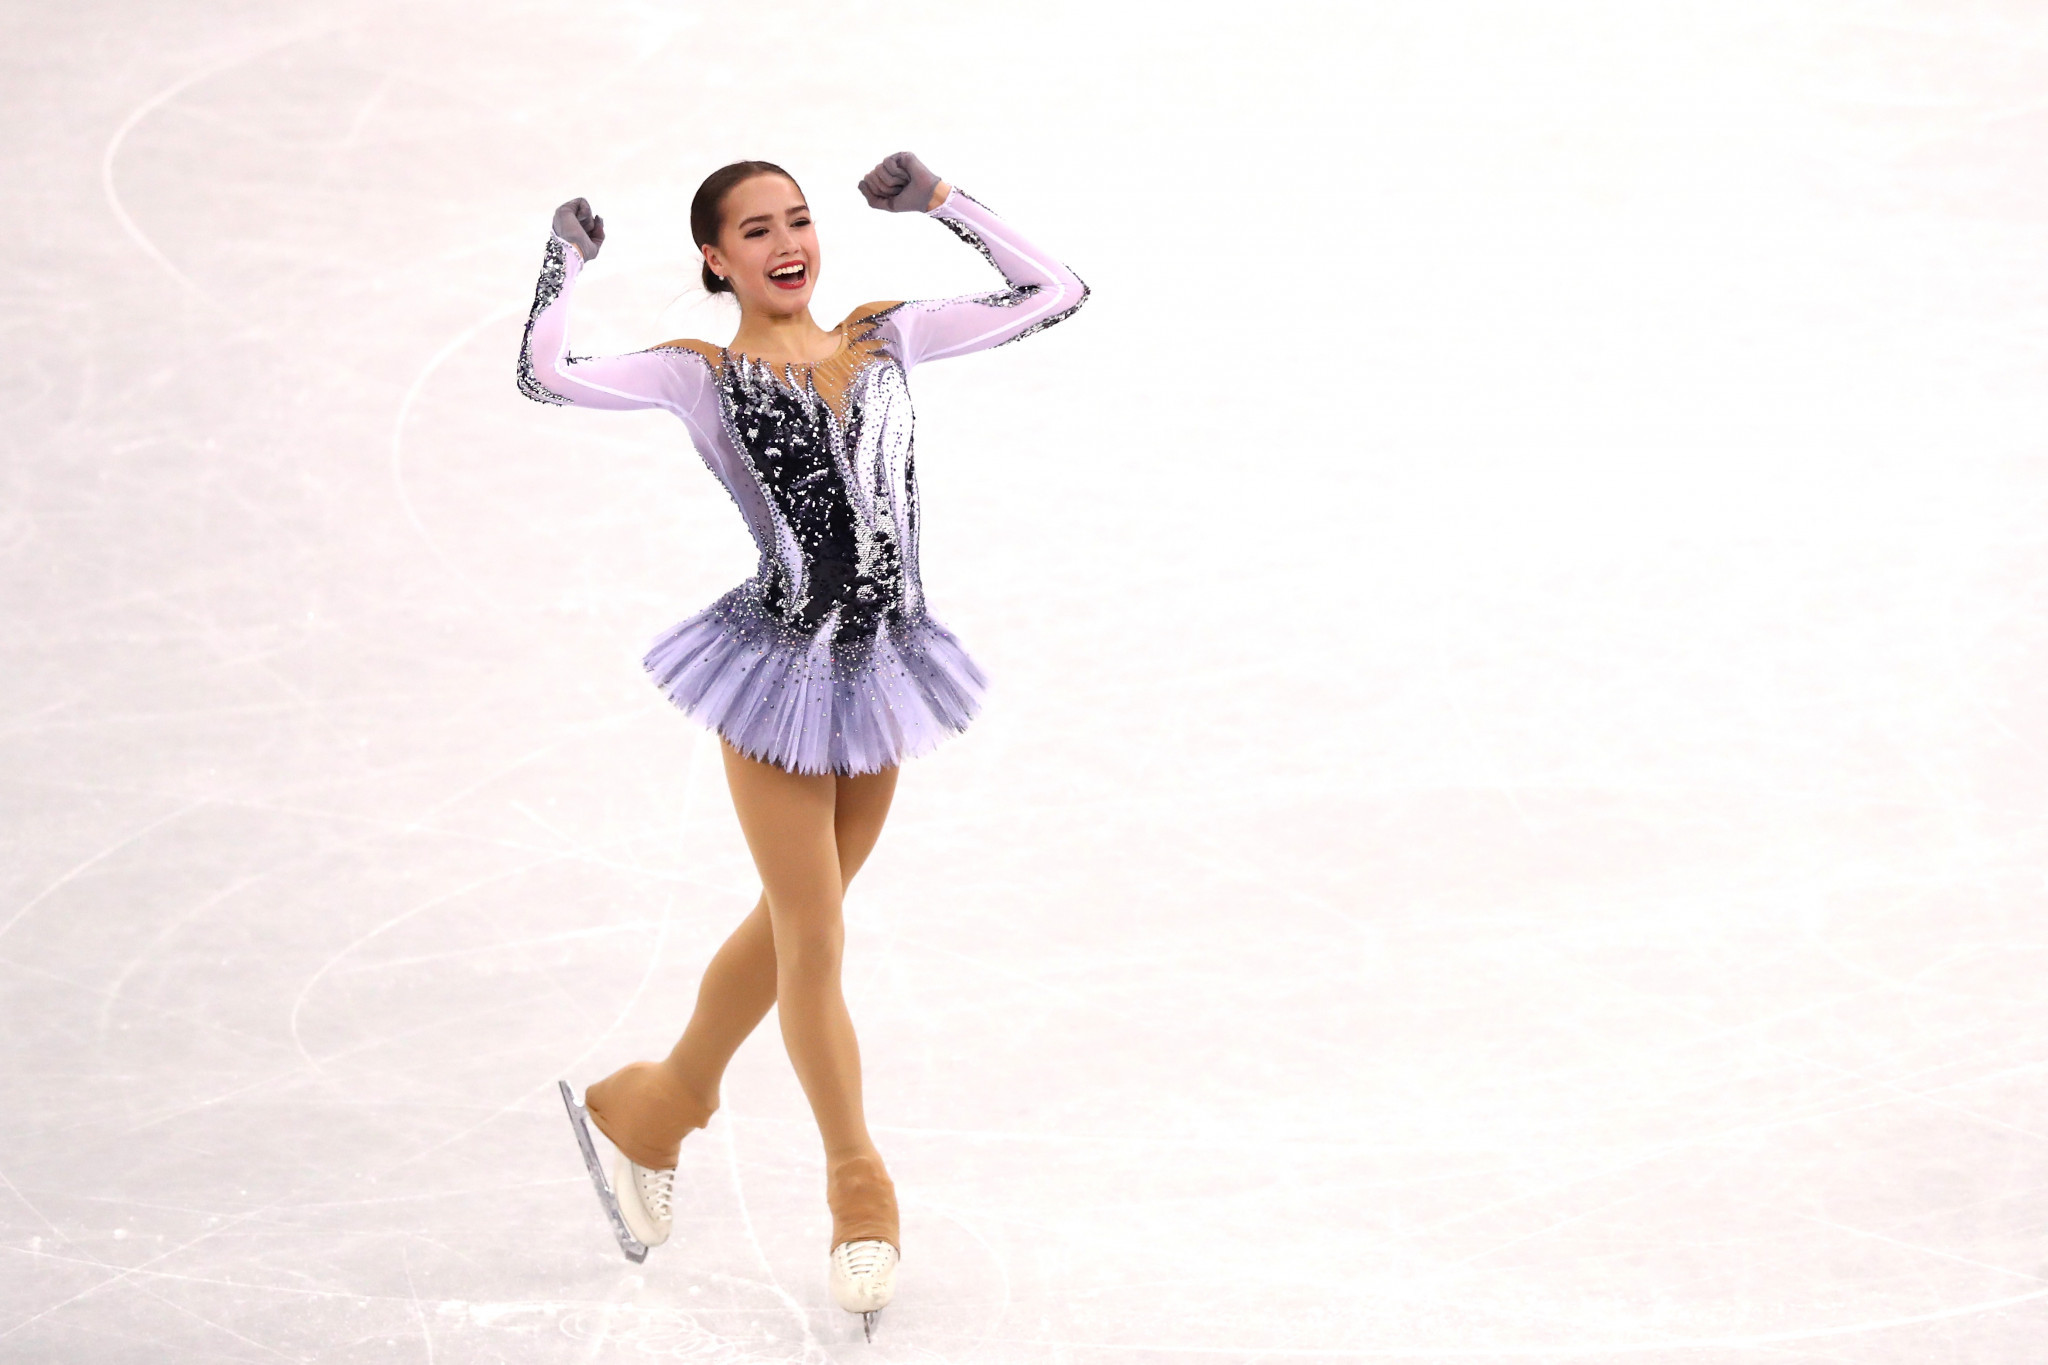 Olympic champion Alina Zagitova is among the athletes at the training camp in Novogorsk ©Getty Images